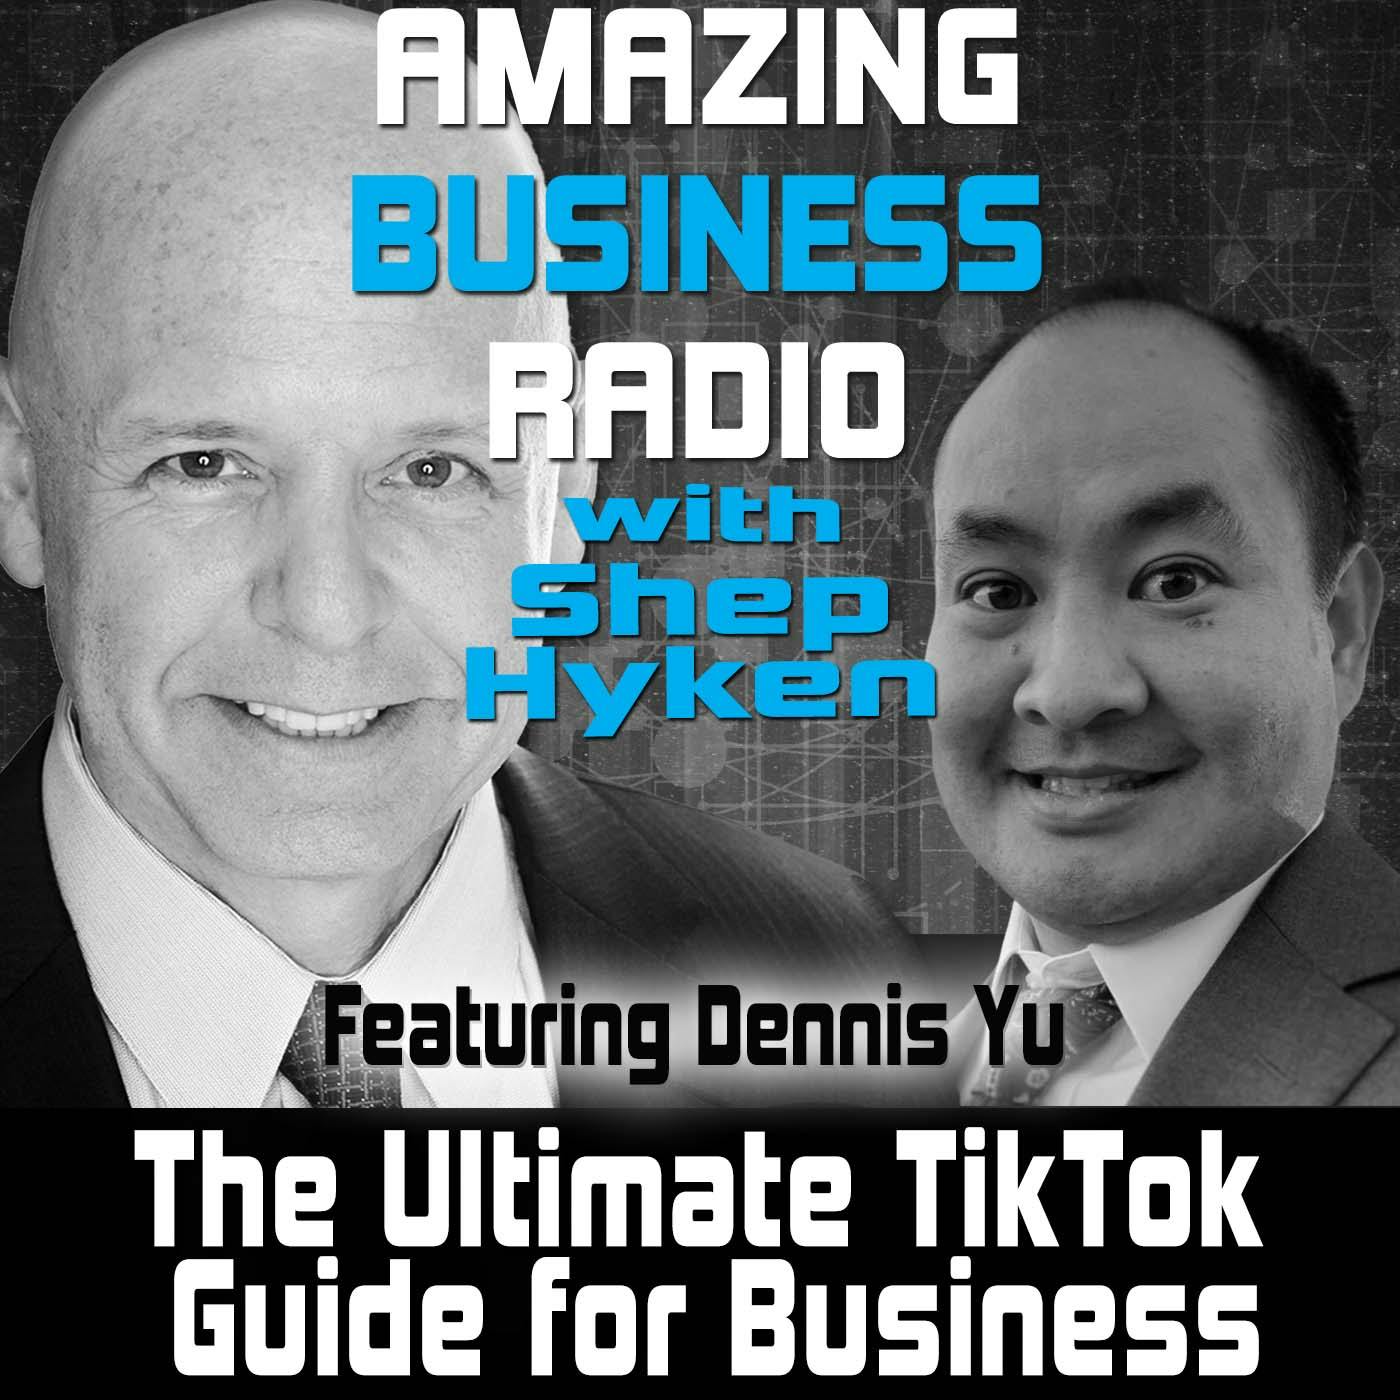 The Ultimate TikTok Guide for Business Featuring Dennis Yu